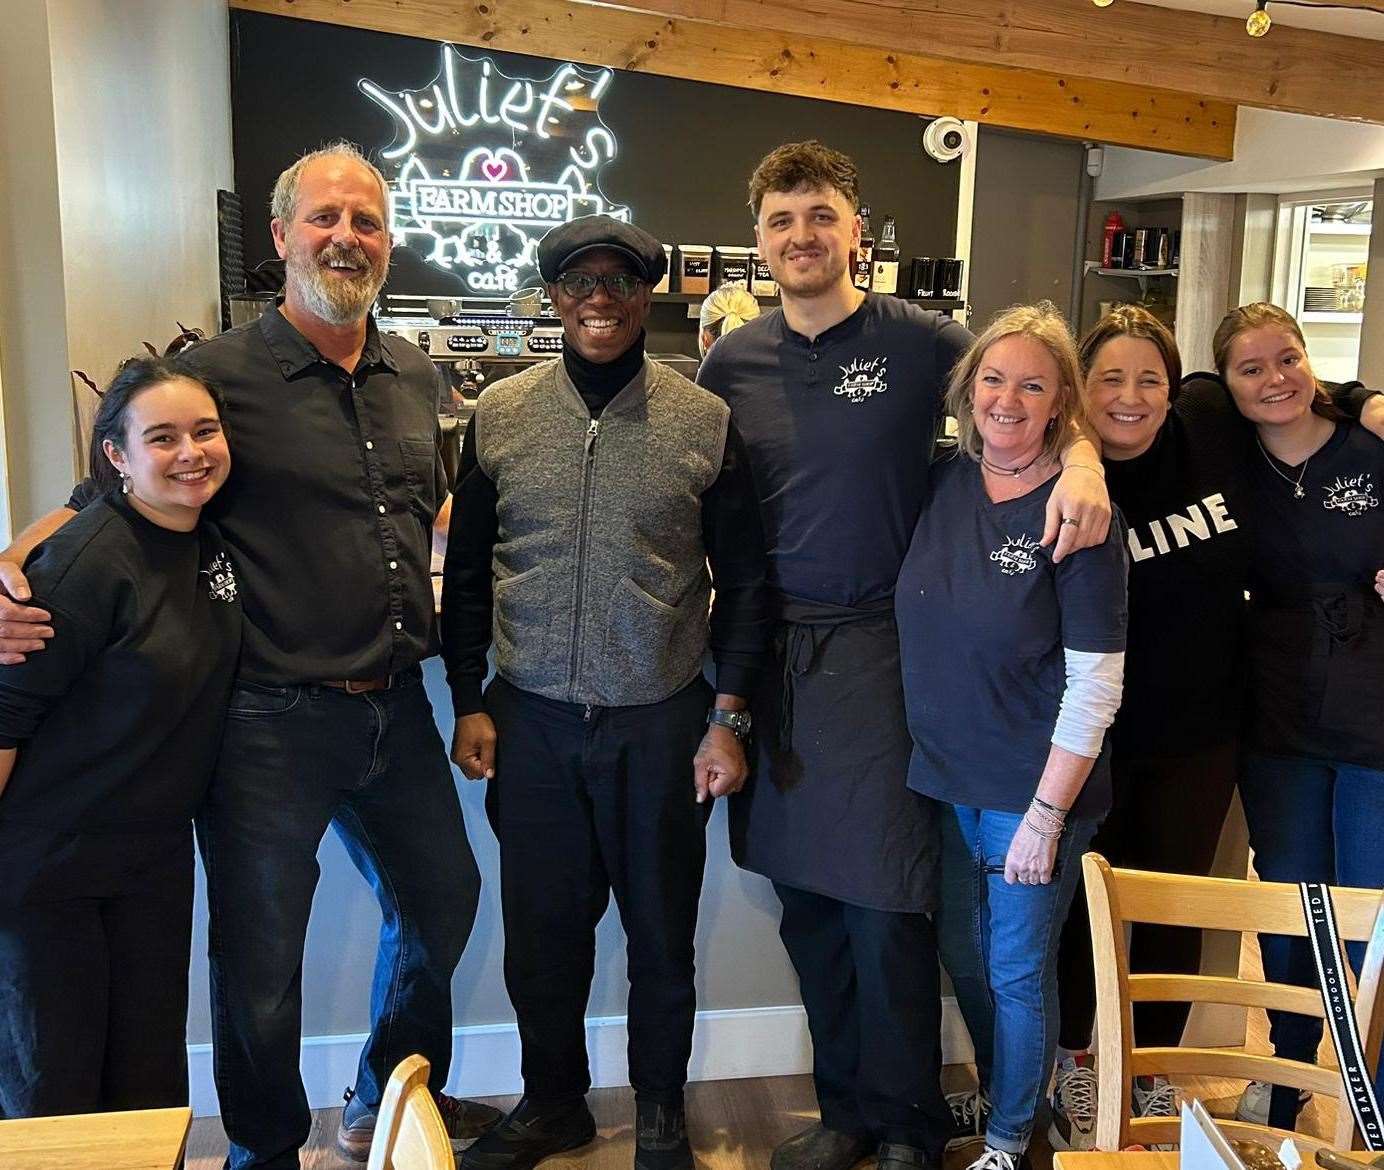 Ian Wright with the team of Juliet's Farm Shop and Cafe in Ash. Picture: Juliet's Farm Shop and Cafe